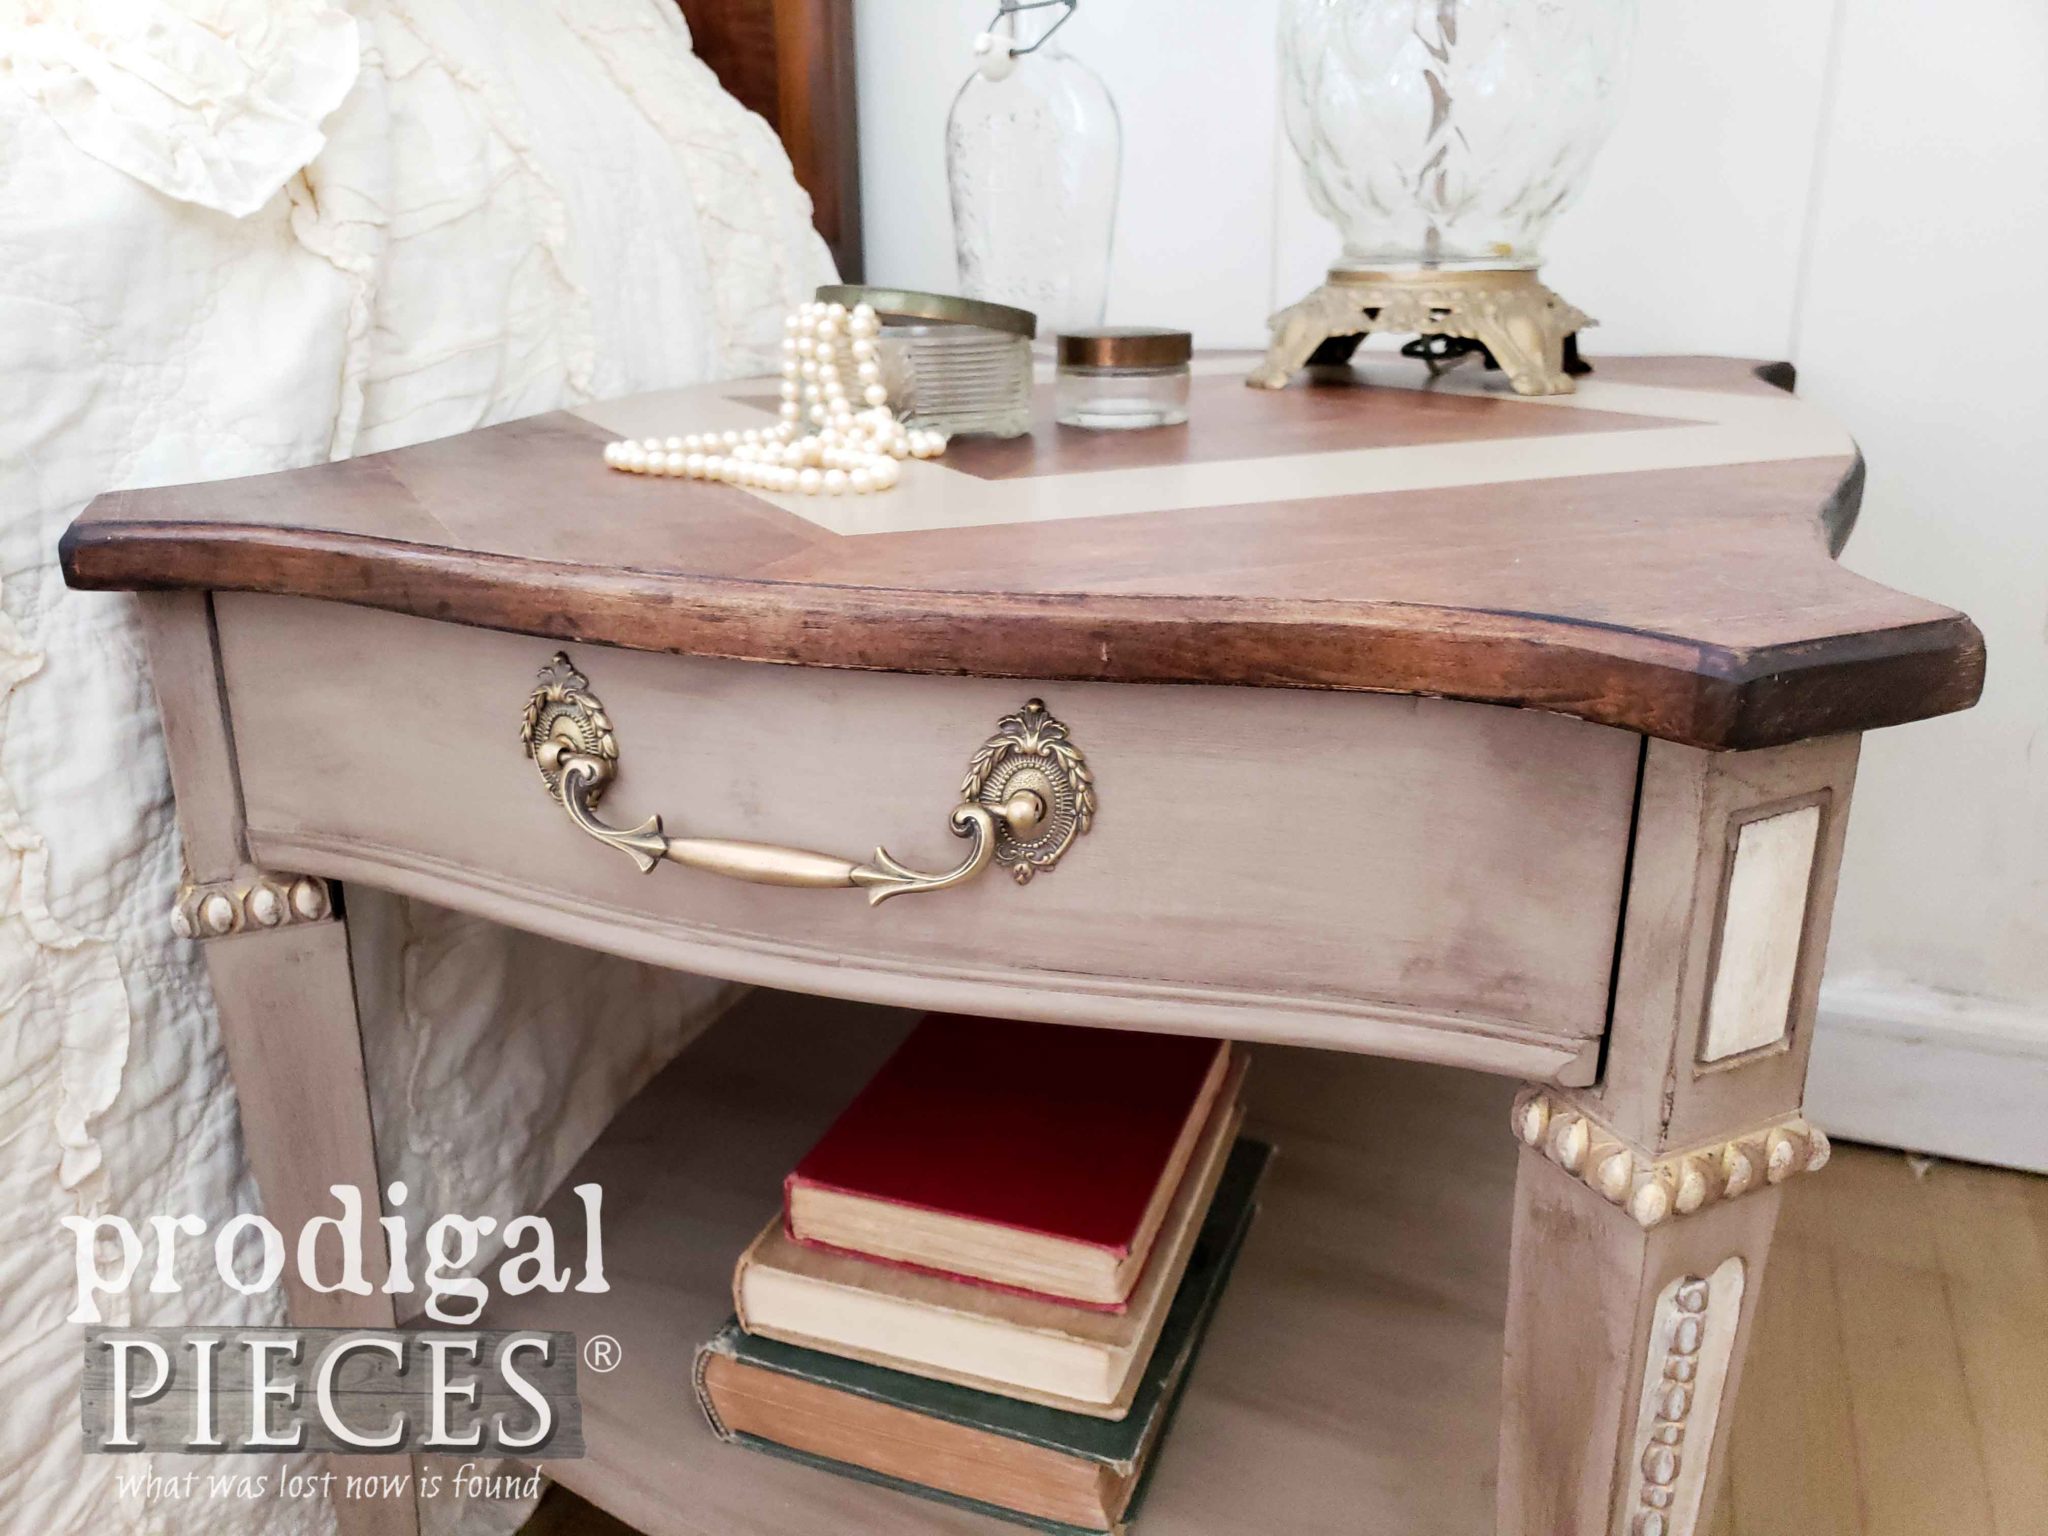 Vintage Side Table with Ornate Brass Drawer Hardware Made New by Prodigal Pieces | prodigalpieces.com